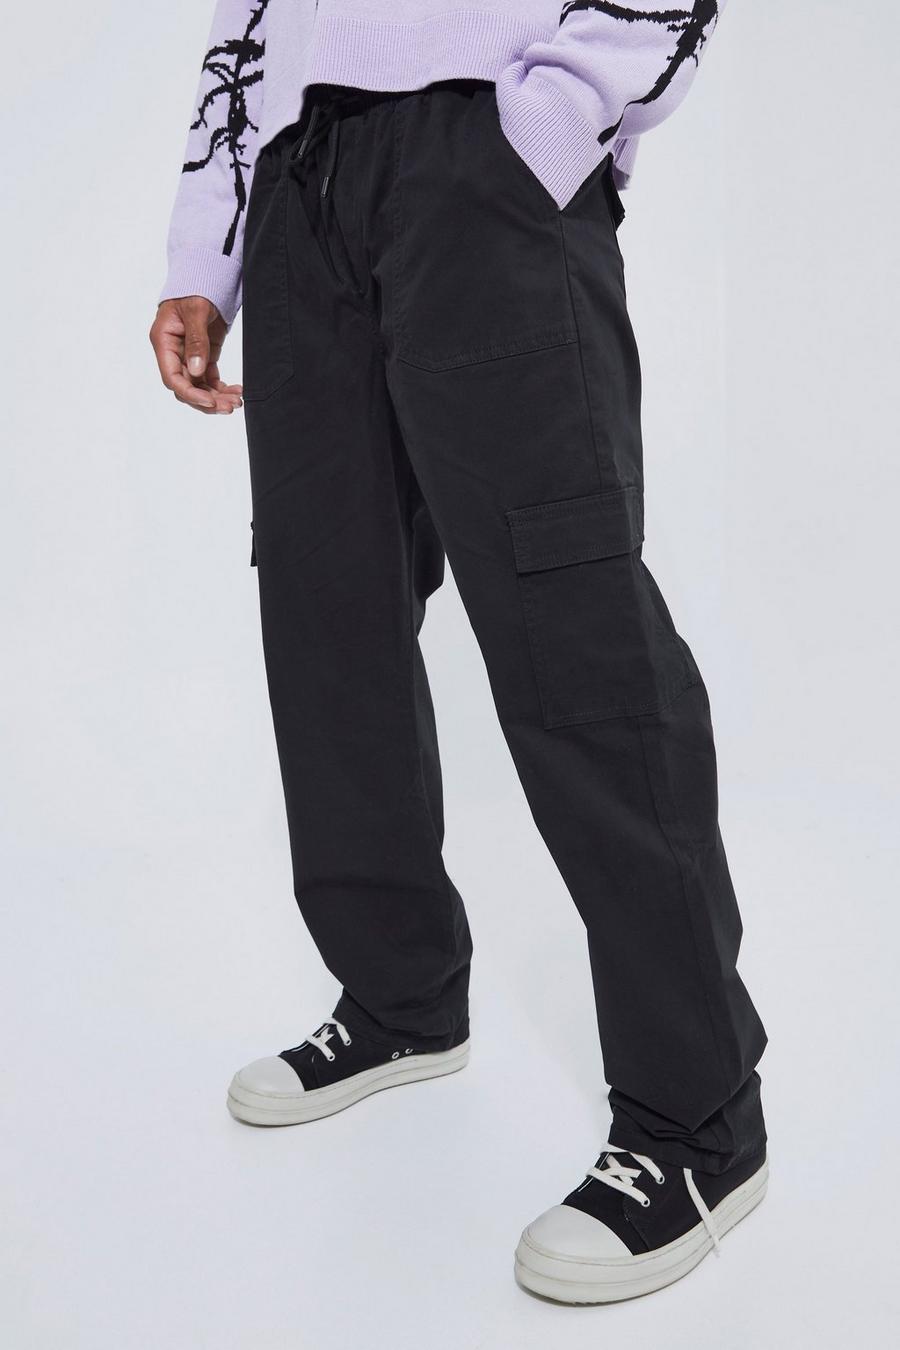 Mens Woven Cargo Pants, Tapered Fit Elasticated Waist, Black – Voi London